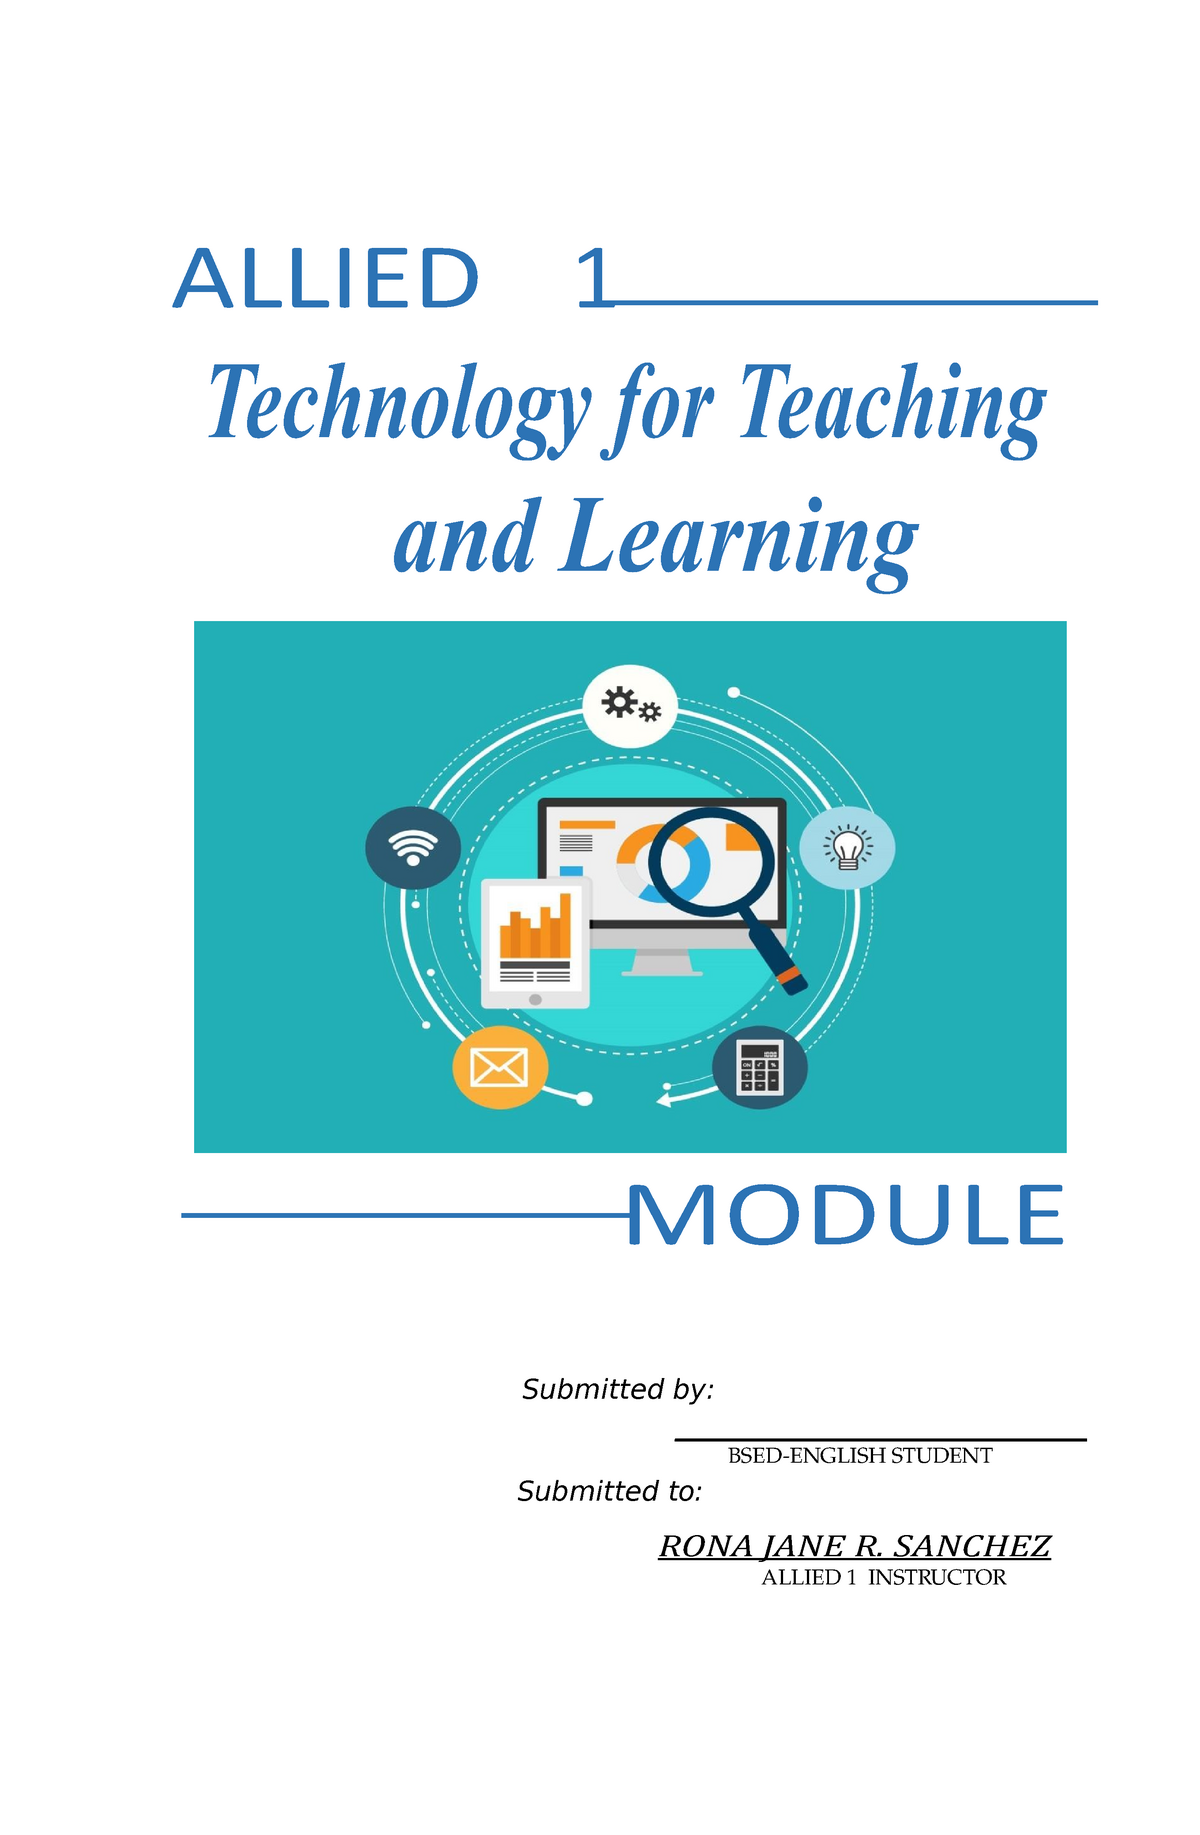 module-technology-for-teaching-and-learning-1-learning-module-allied